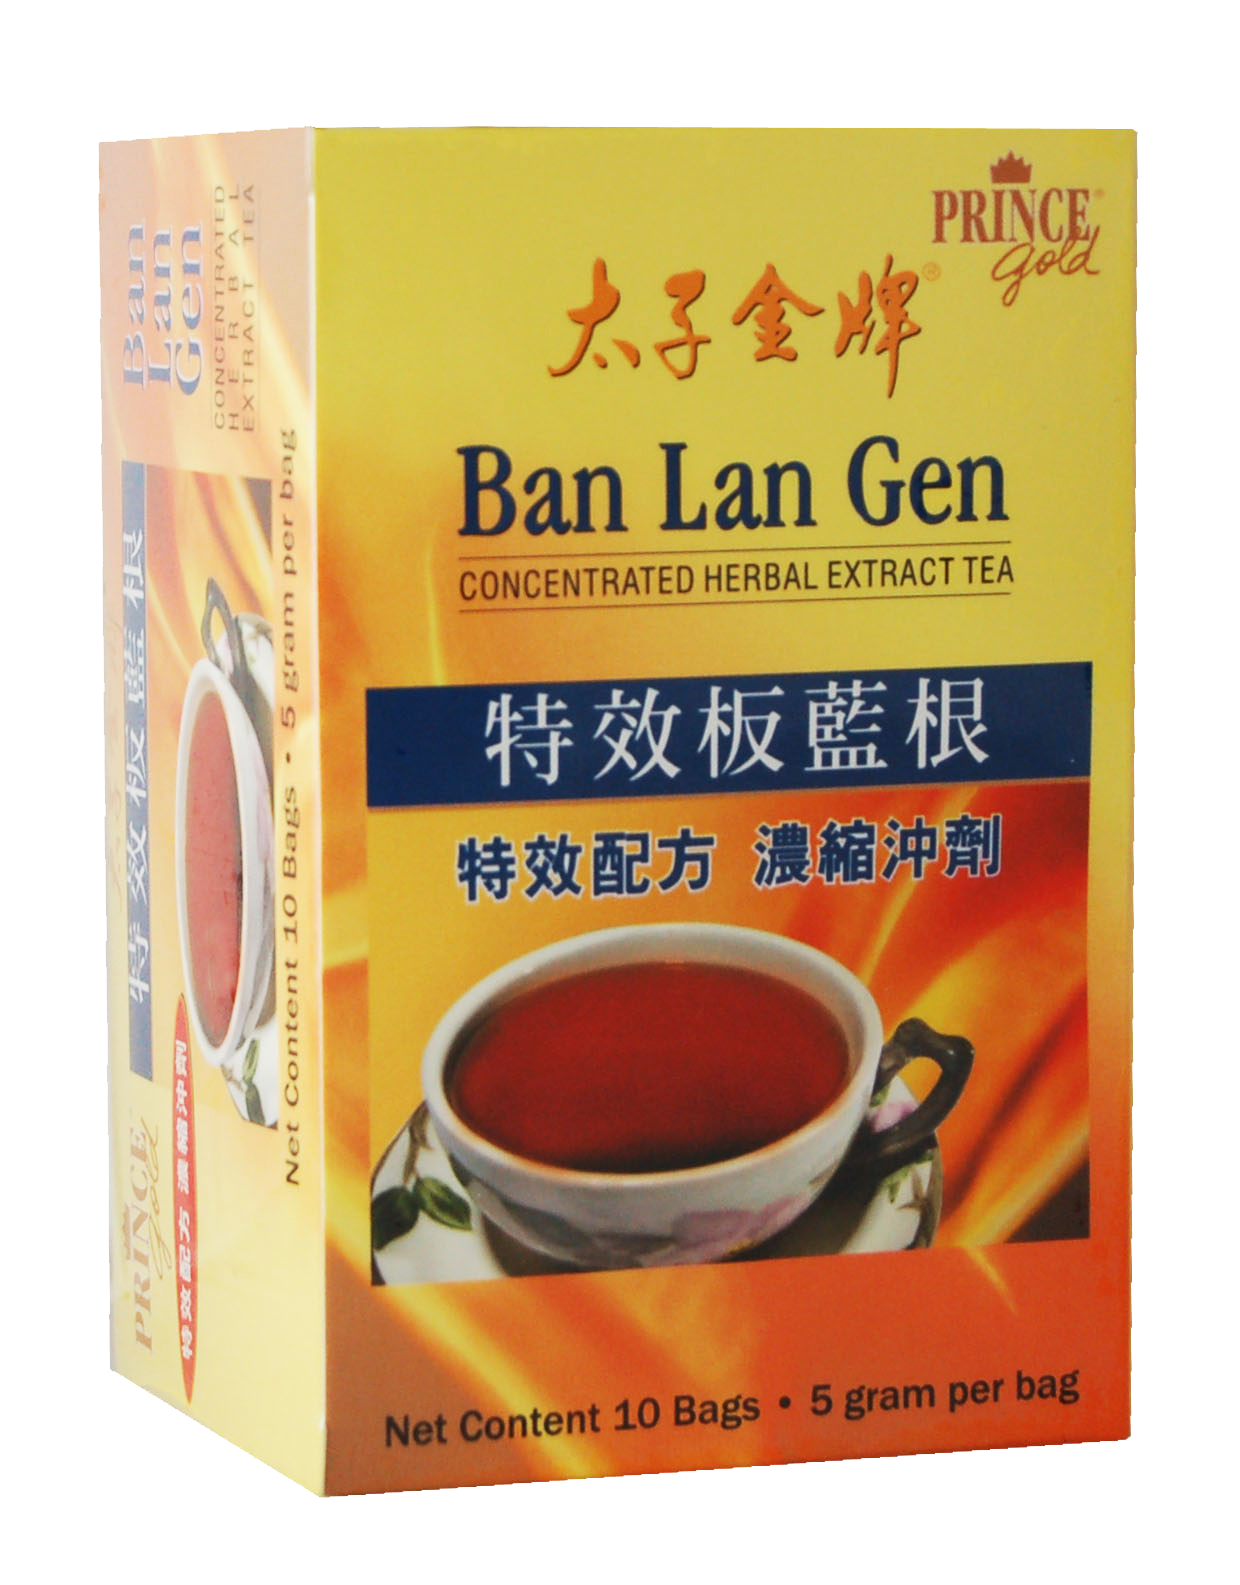 Ban Lan Gen Concentrated Herbal Extract Tea